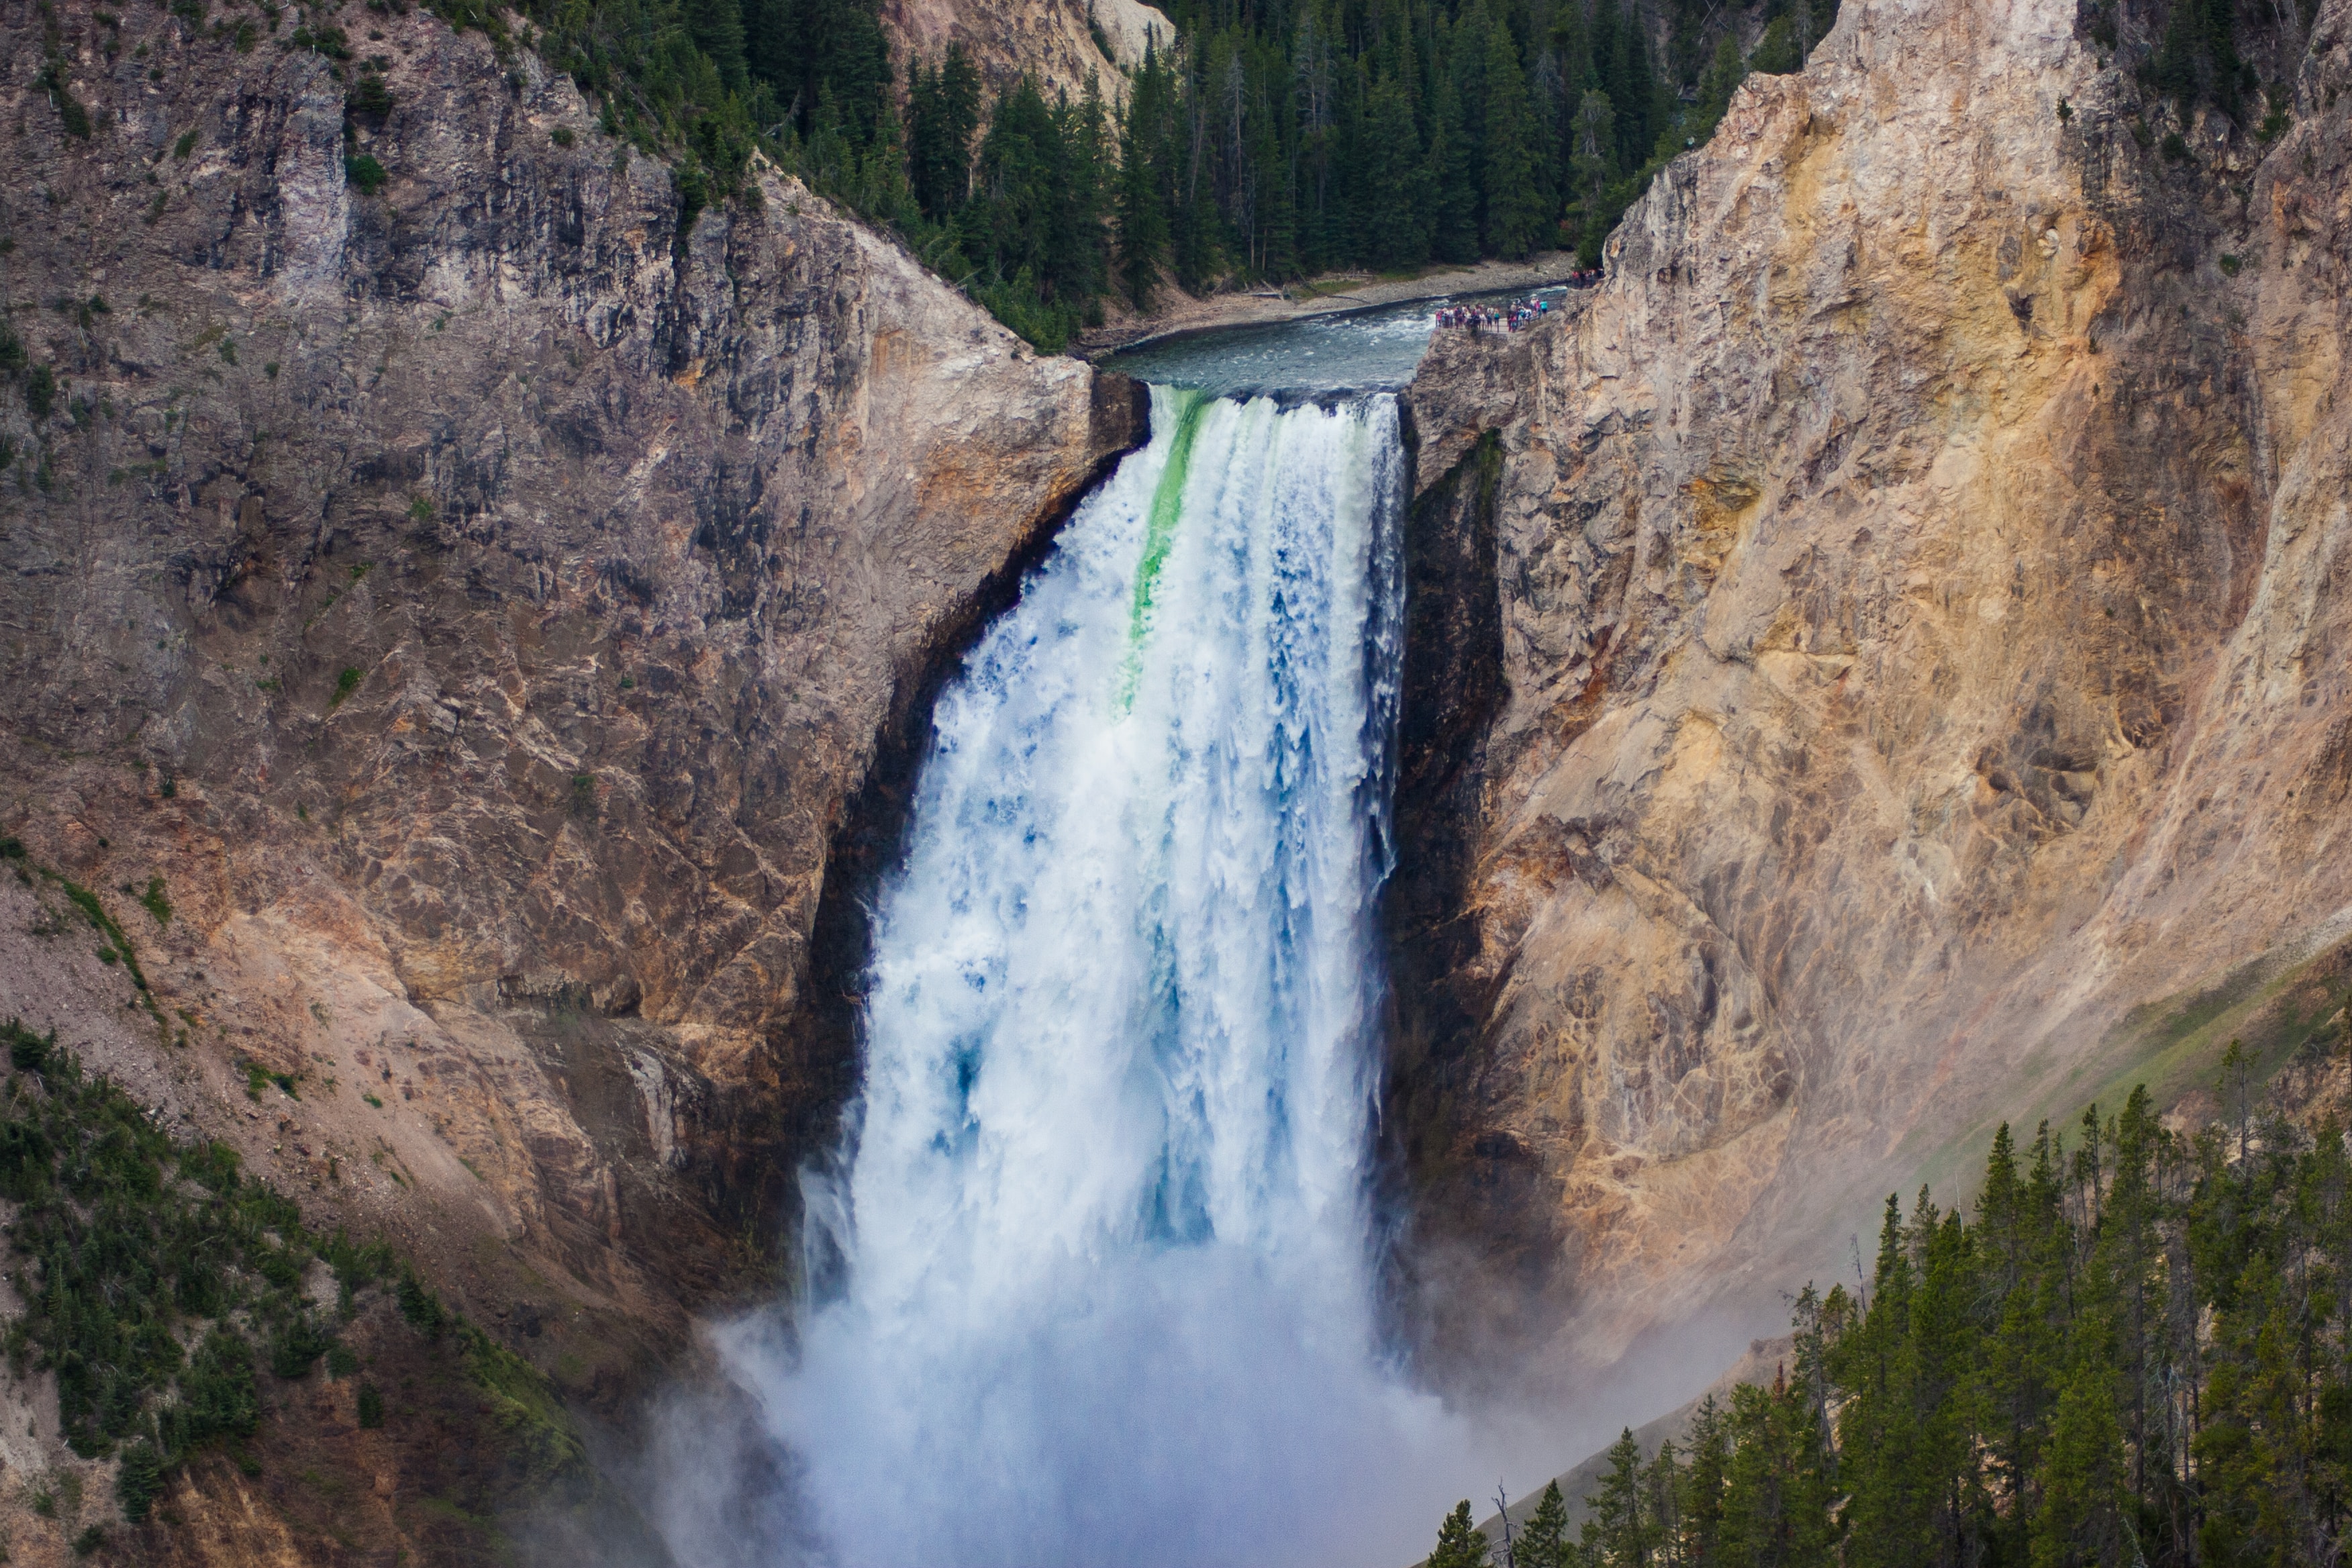 HISTORY OF THE YELLOWSTONE NATIONAL PARK